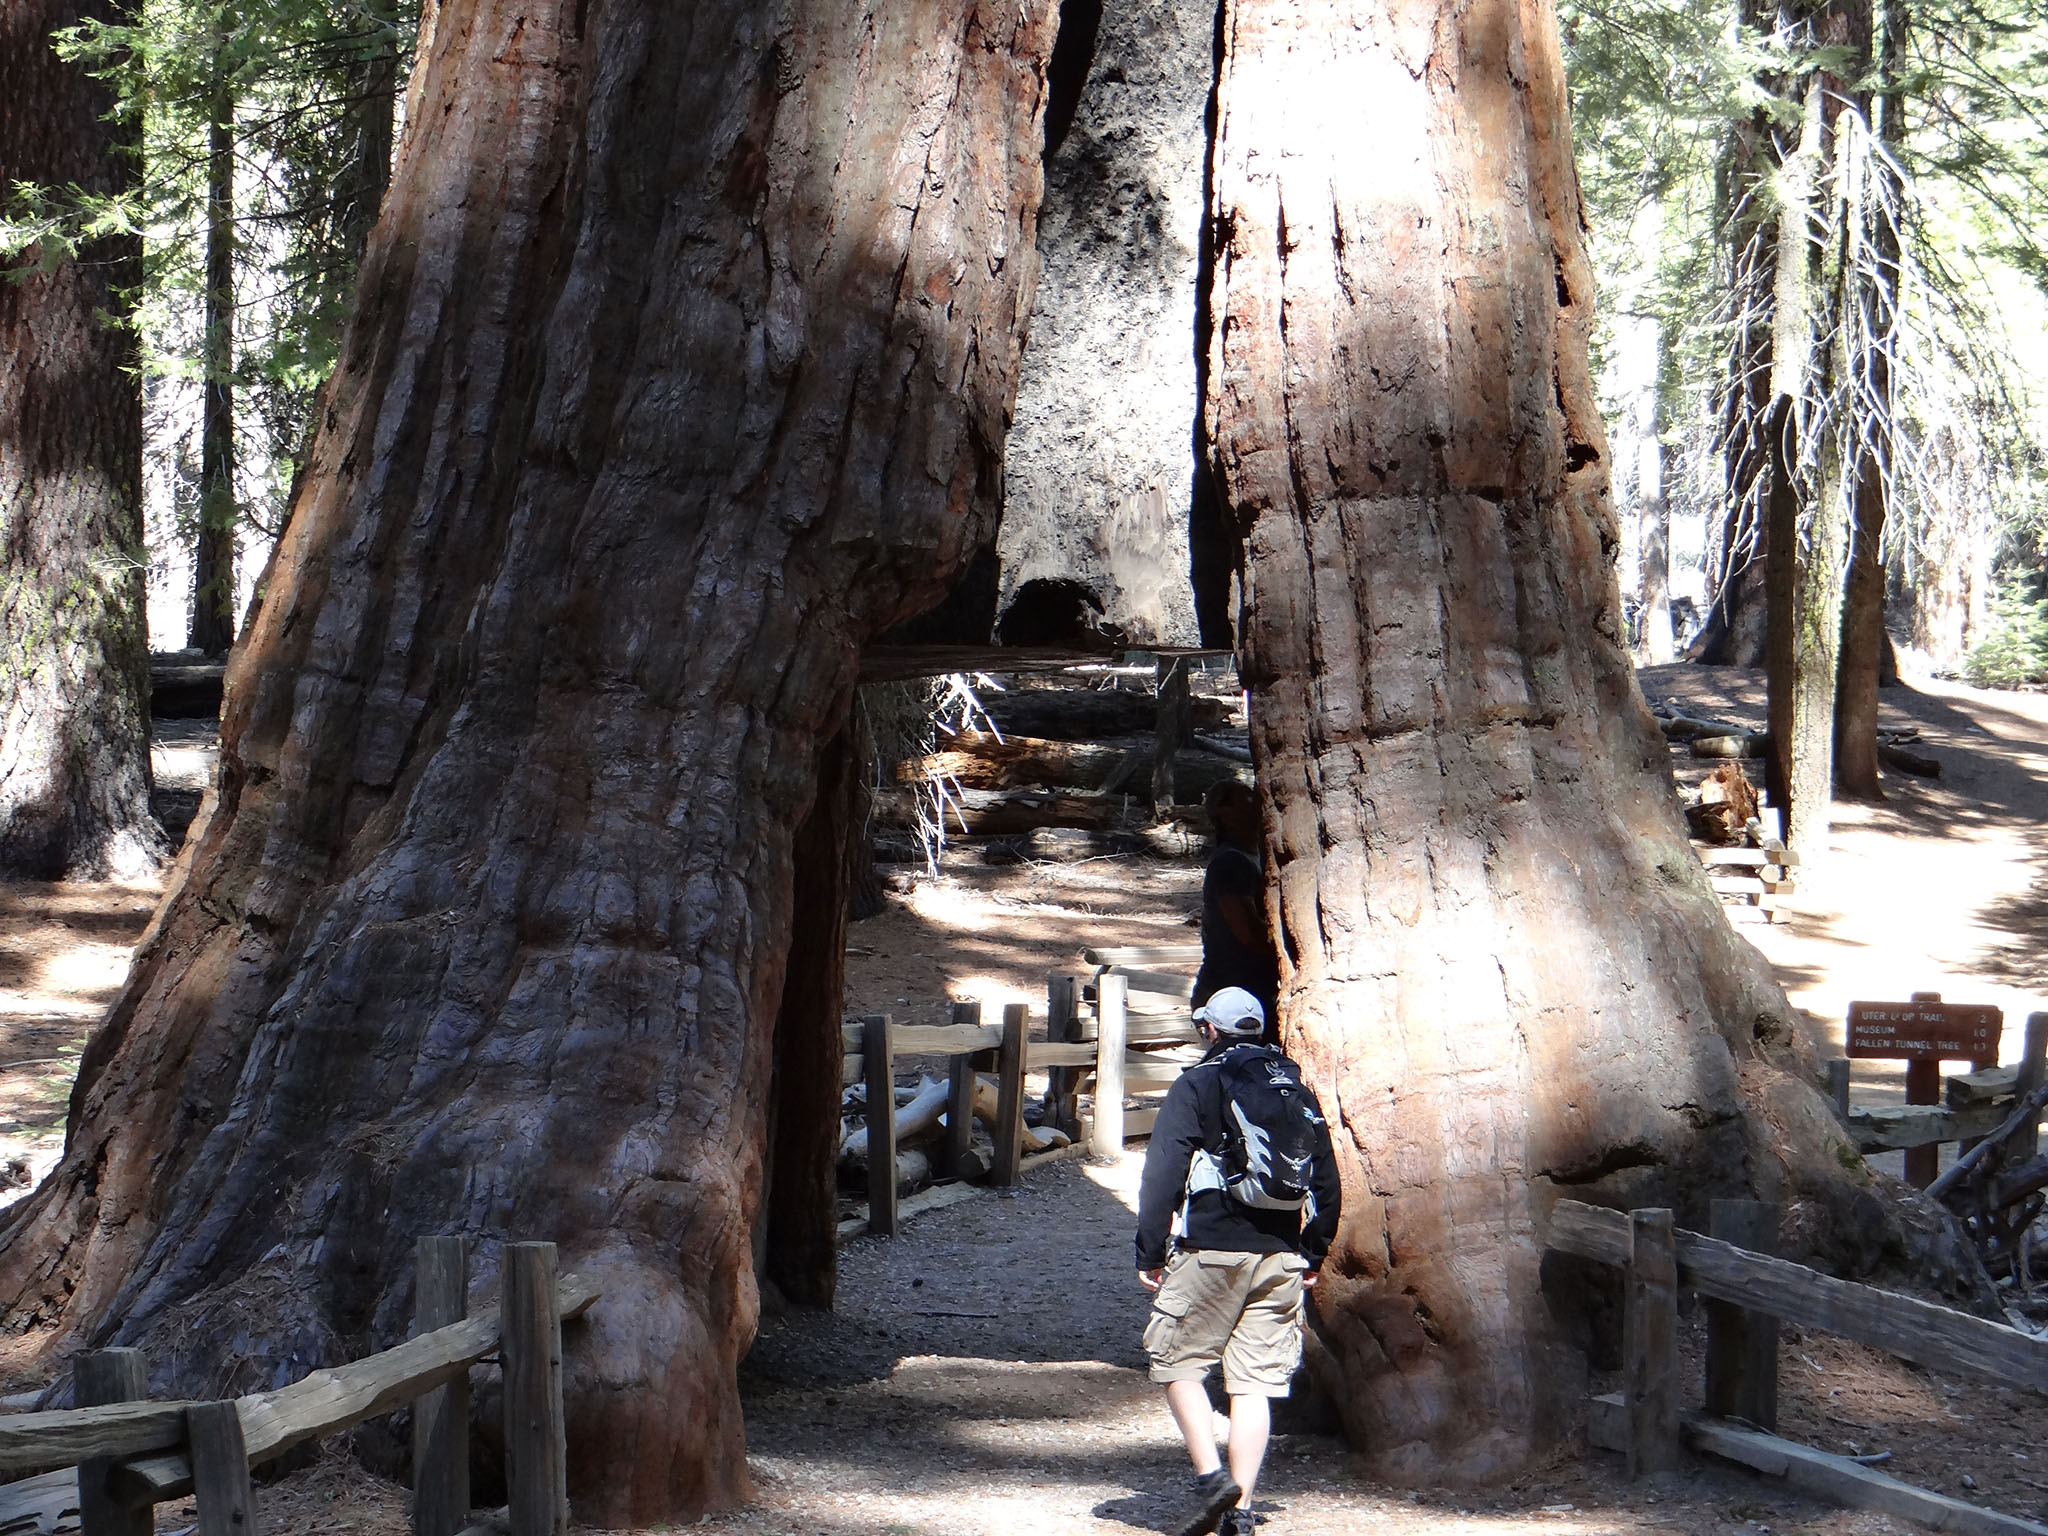 Giant sequoias with tunnel cut through it known as the "Tunnel tree"